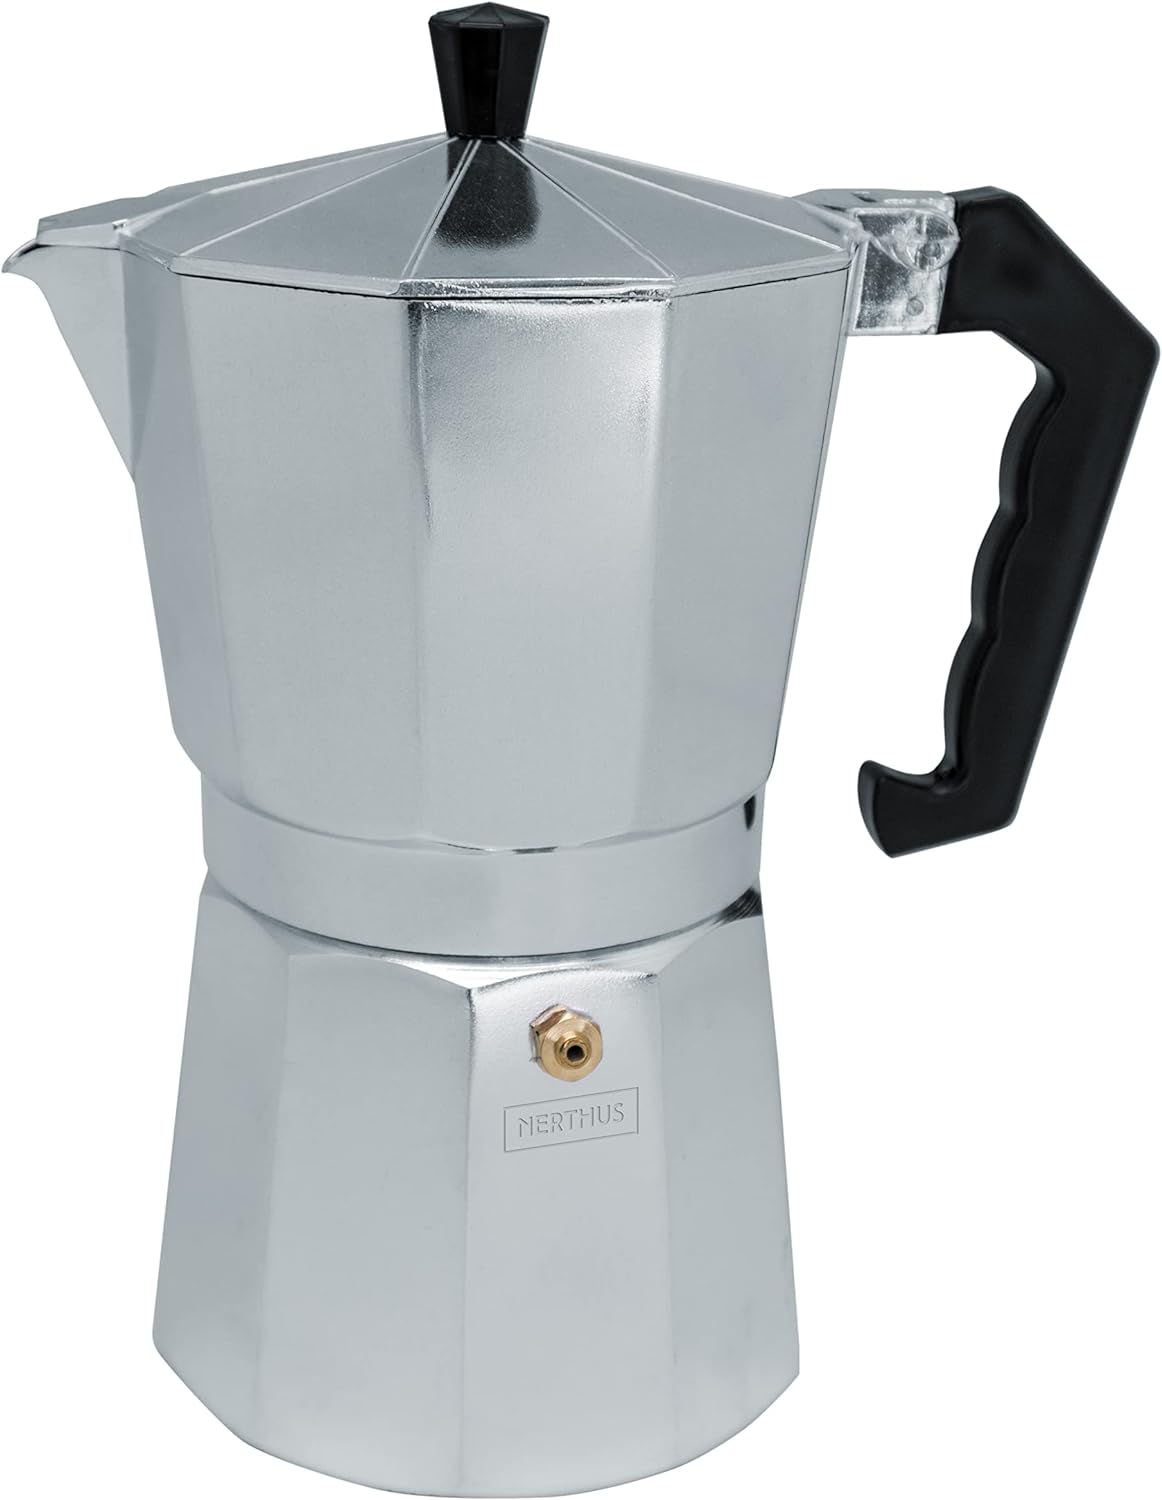 Nerthus fih 833 3 cup induction coffee maker Classic Italian Coffee Maker